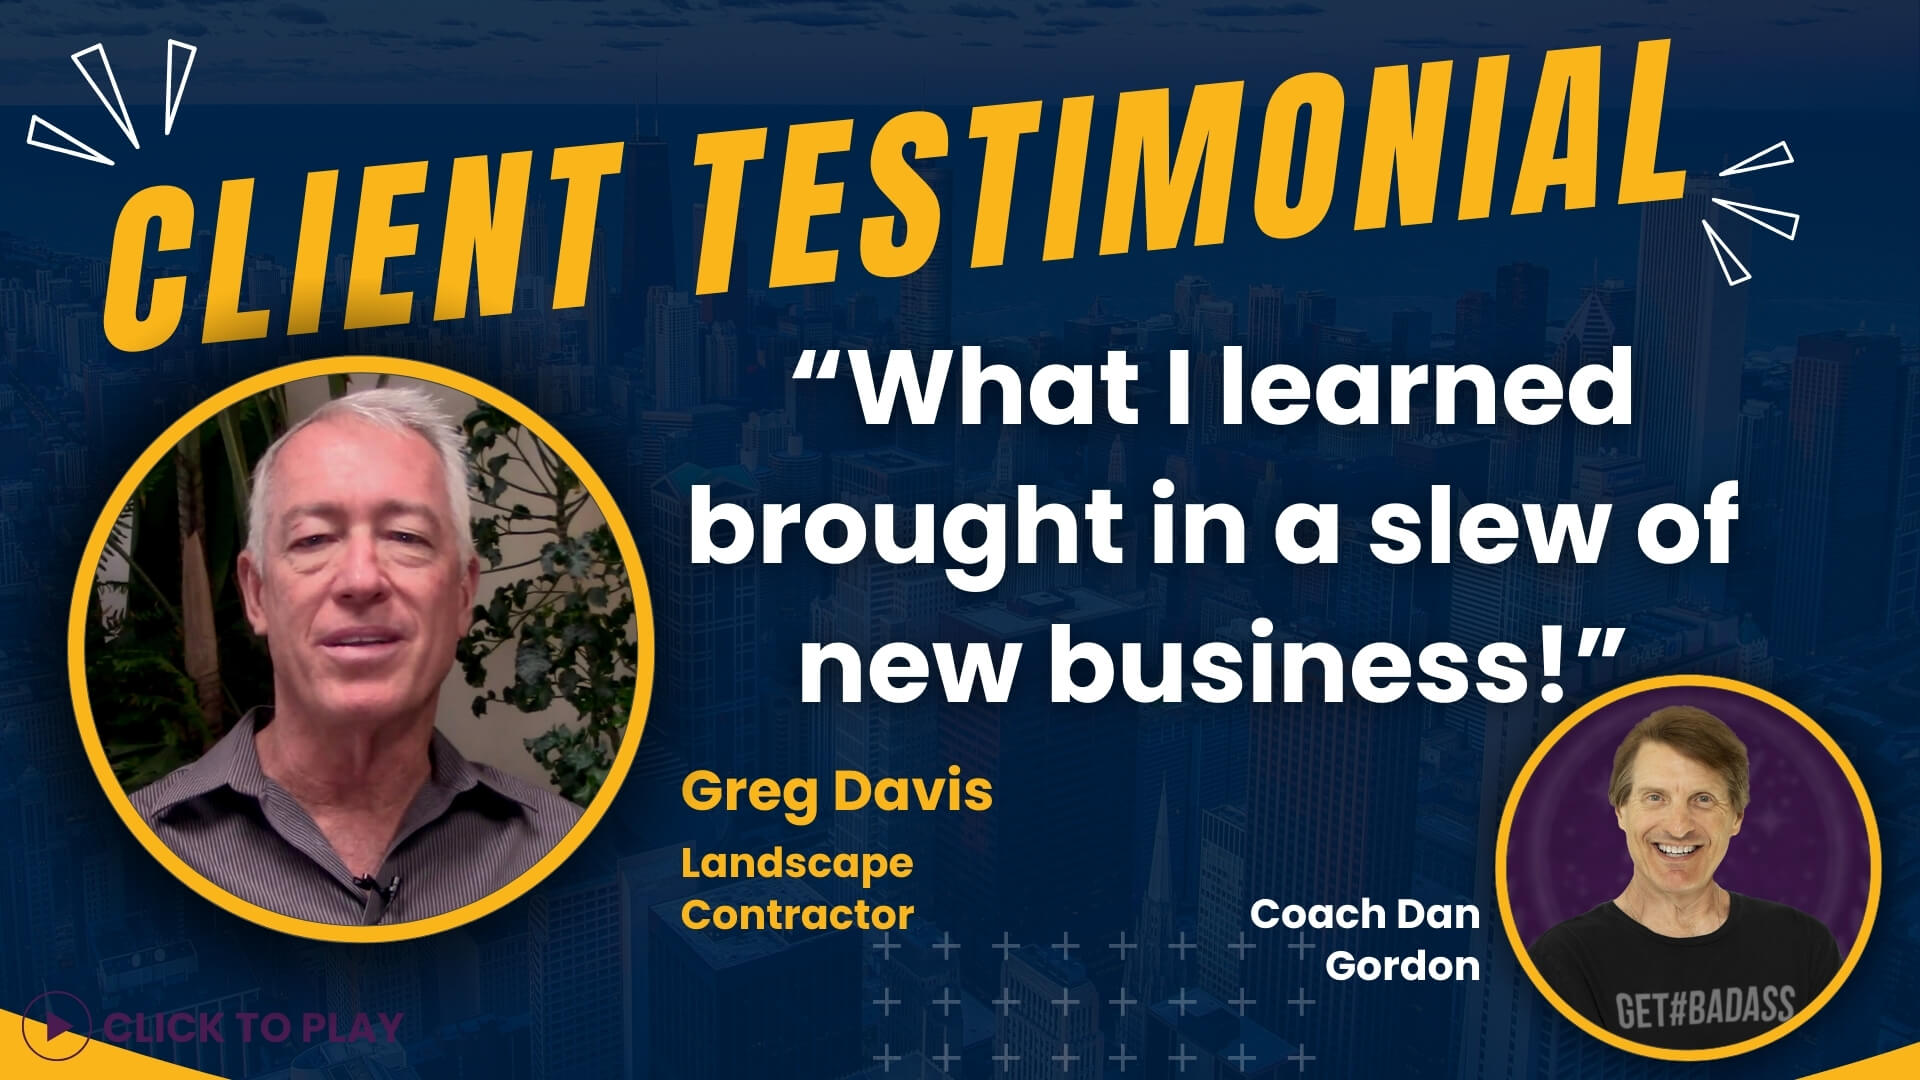 Landscape Contractor Greg Davis credits what he learned from Coach Dan Gordon with bringing in a wealth of new business, showcased in a 'Click to Play' video testimonial.